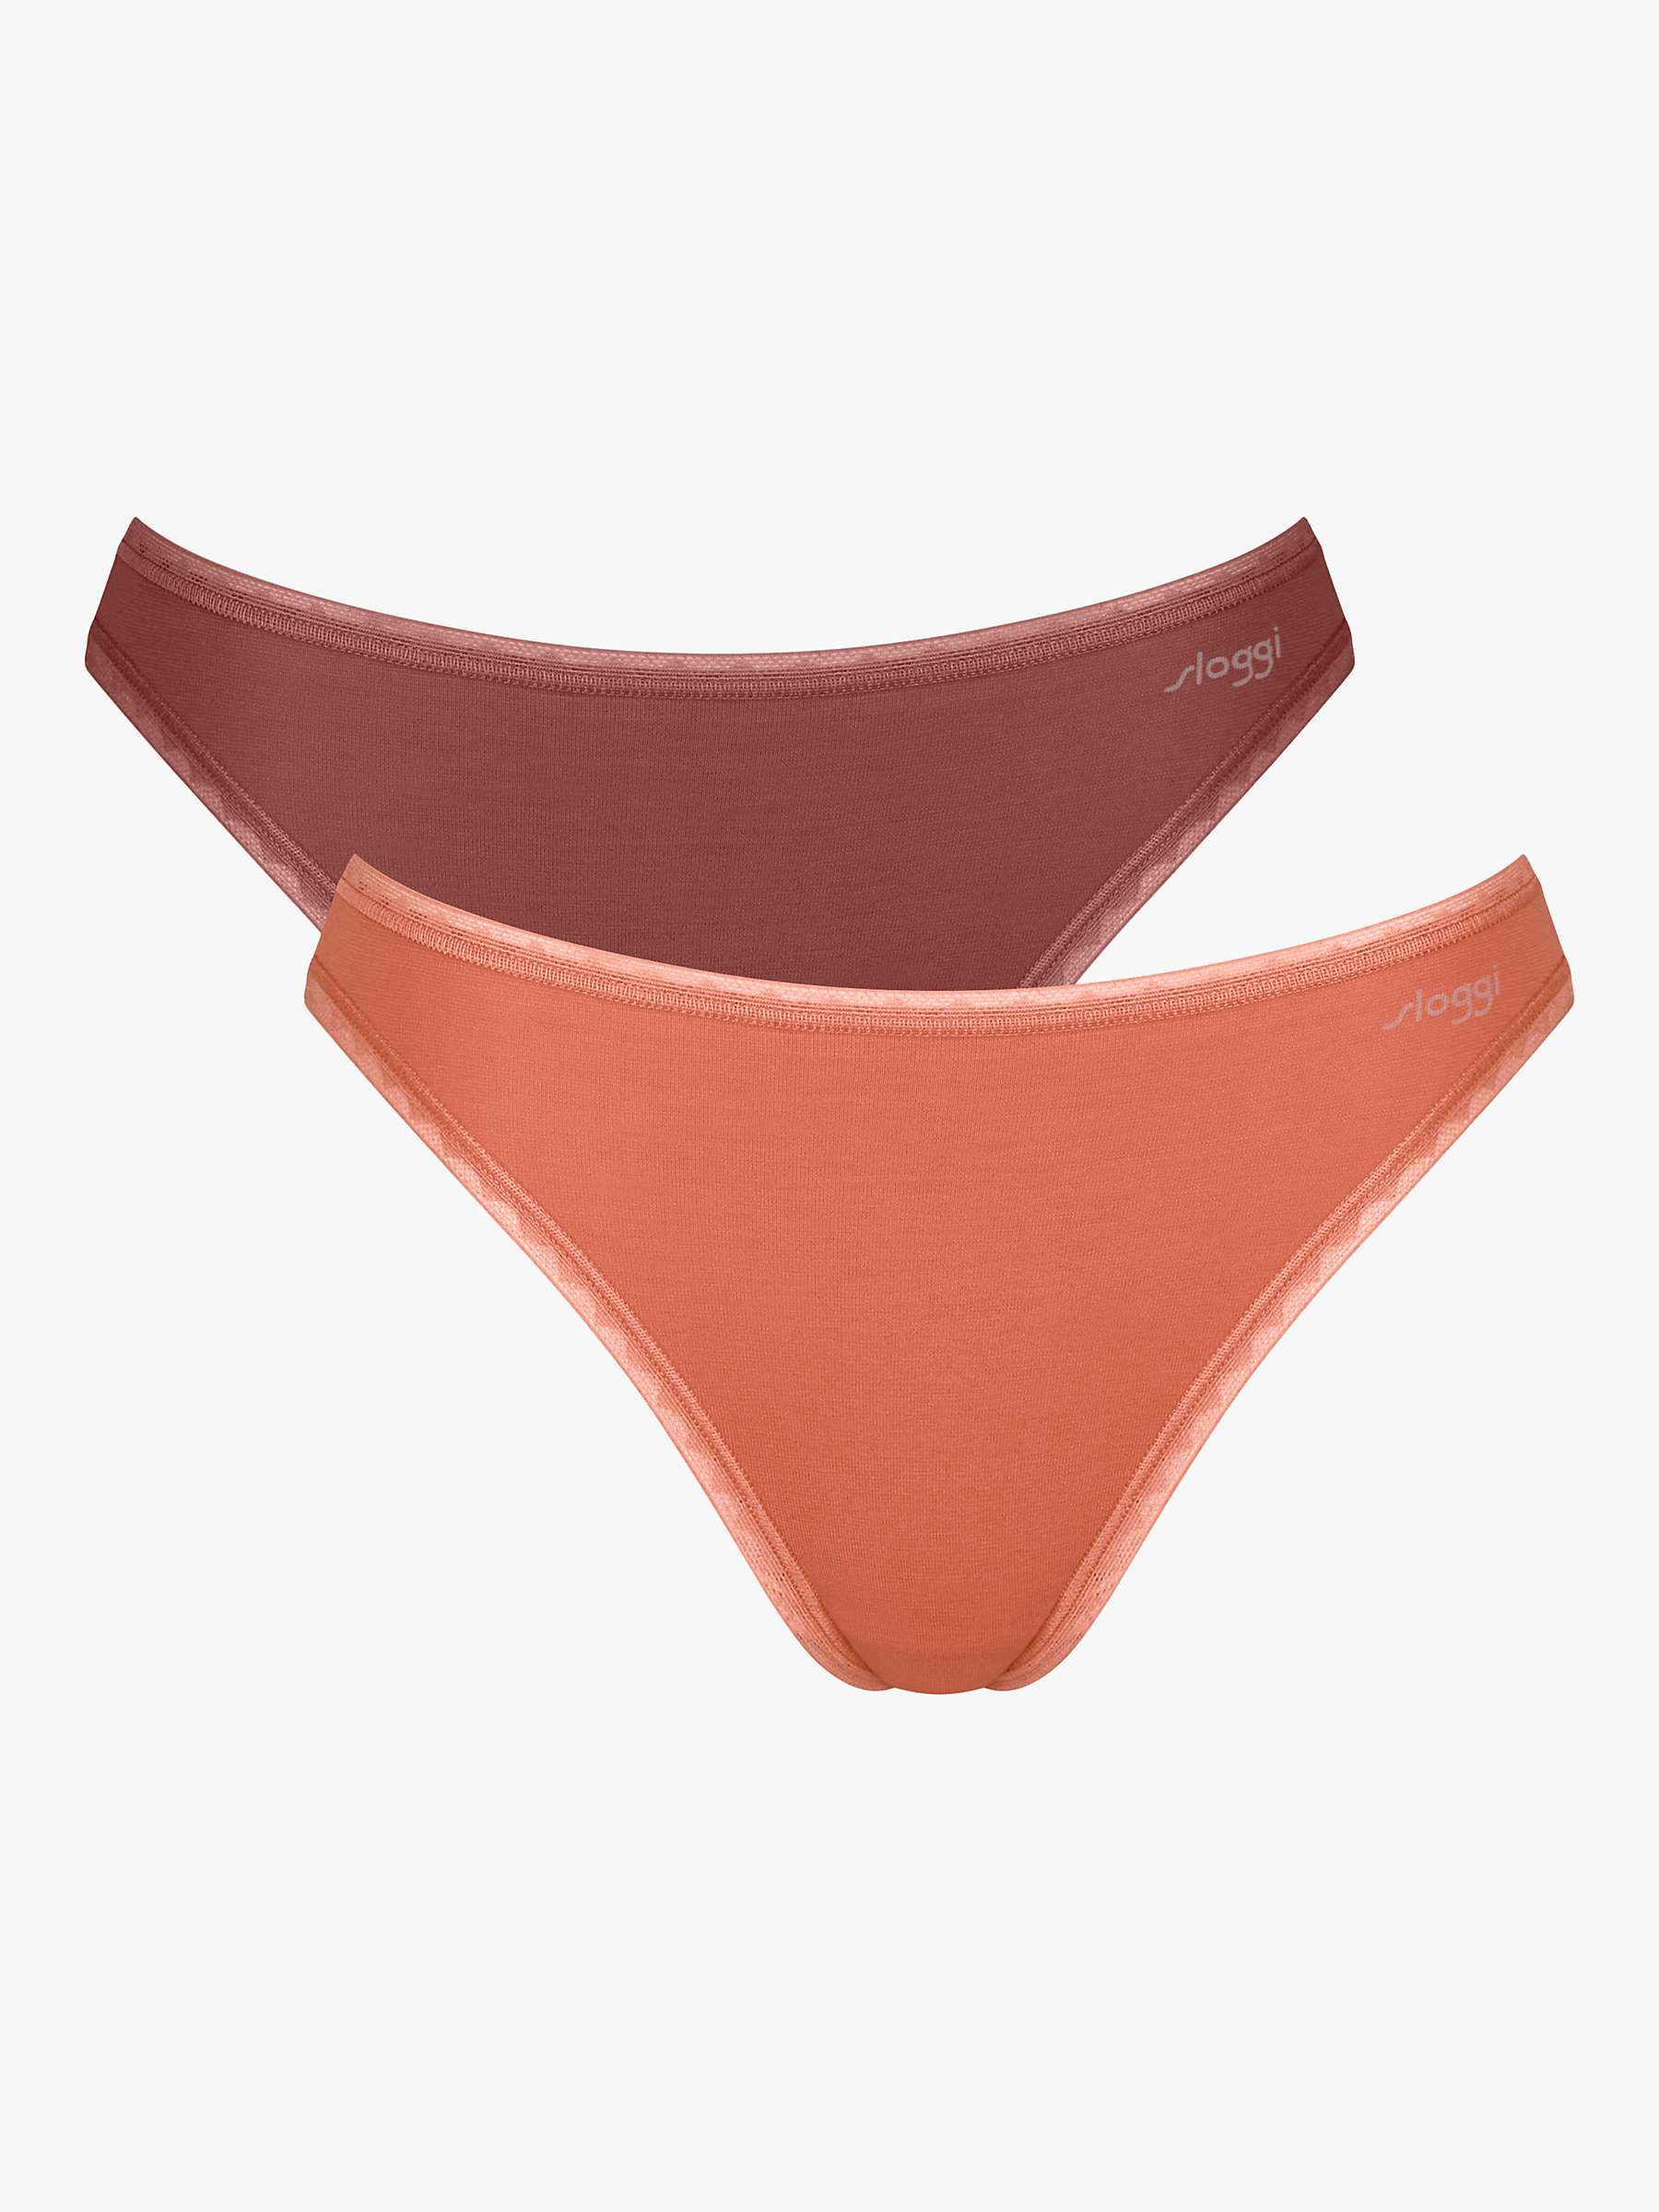 Buy sloggi GO Tai Knickers, Pack of 2, Red/Light Comb Online at johnlewis.com